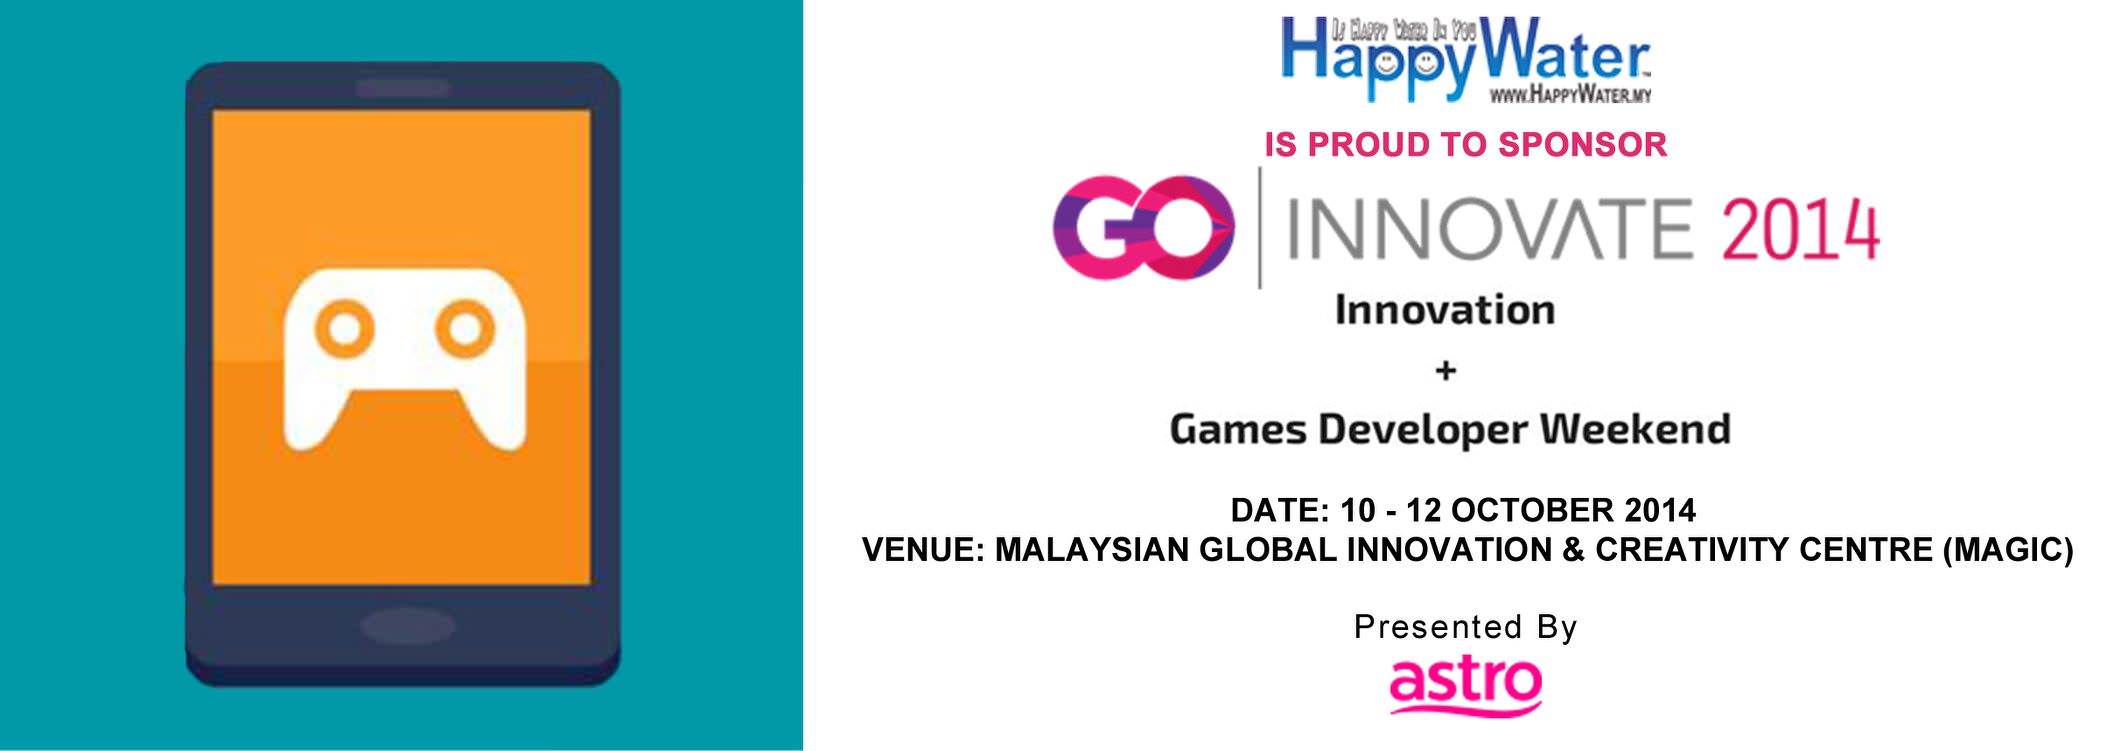 #HappyWater is proud to be one of the supporting partners - #Drinking #Water #Supplier for #GOINNOVATE2014